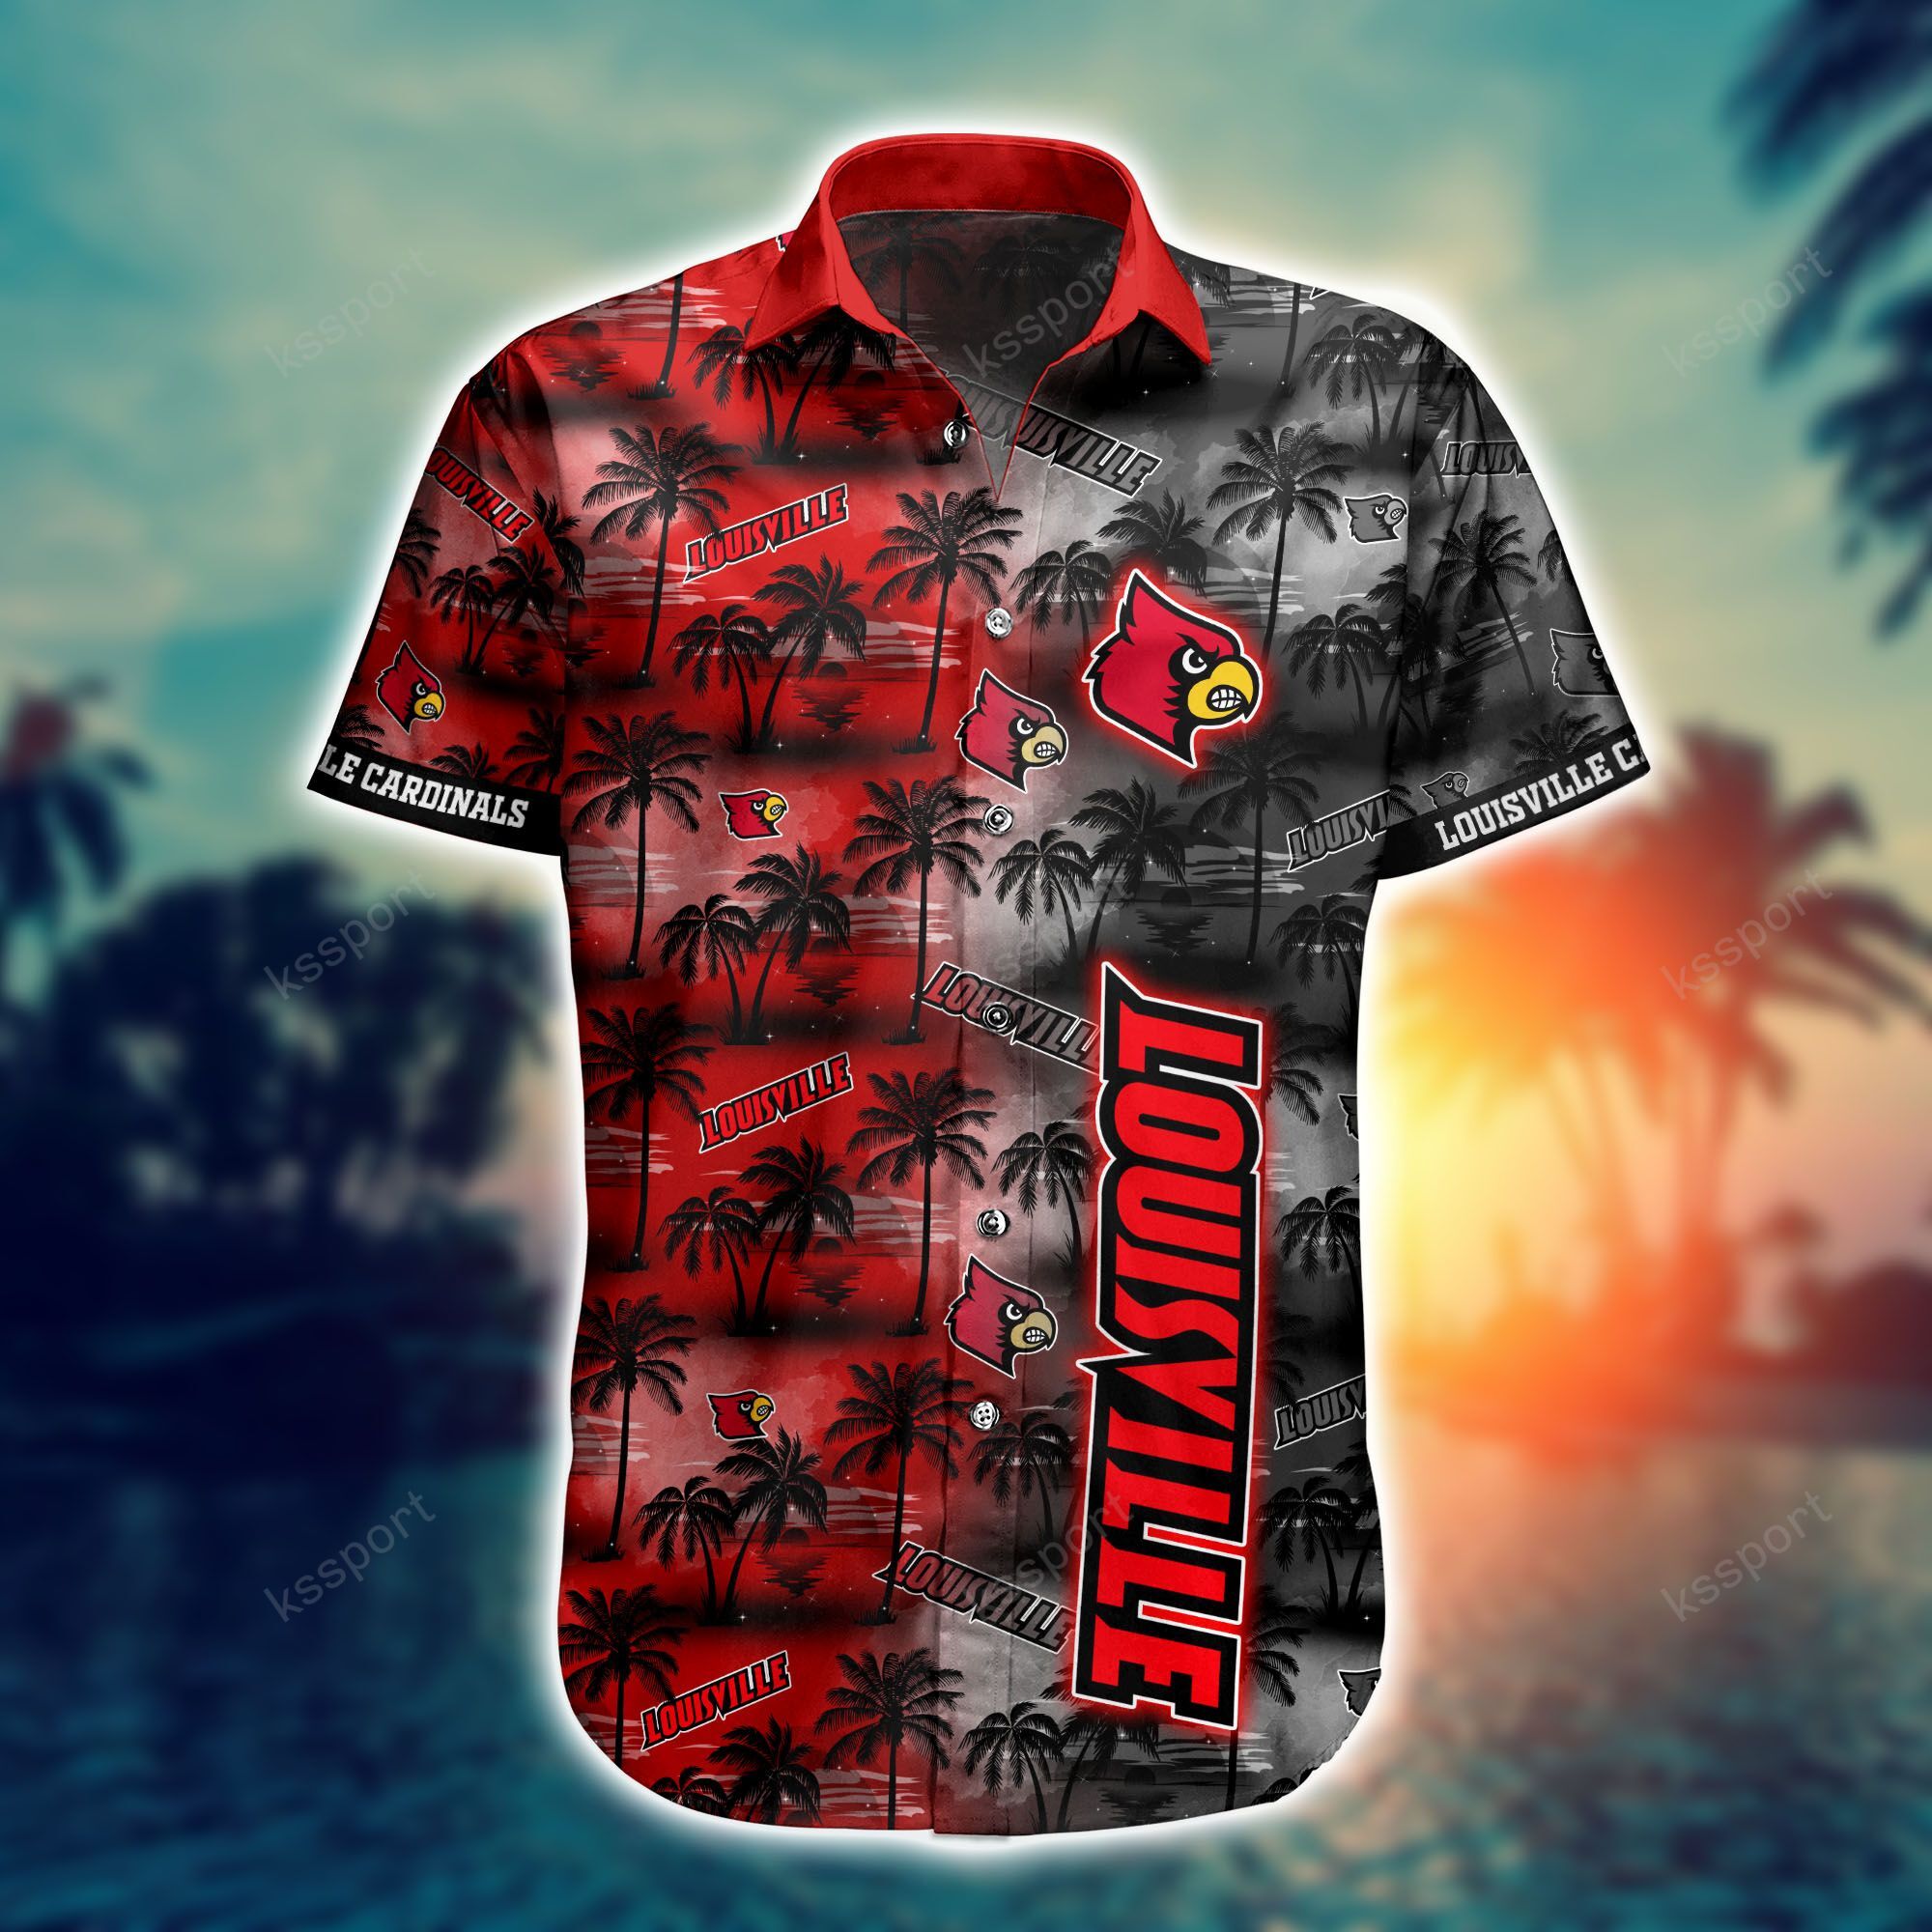 Top cool Hawaiian shirt 2022 - Make sure you get yours today before they run out! 143